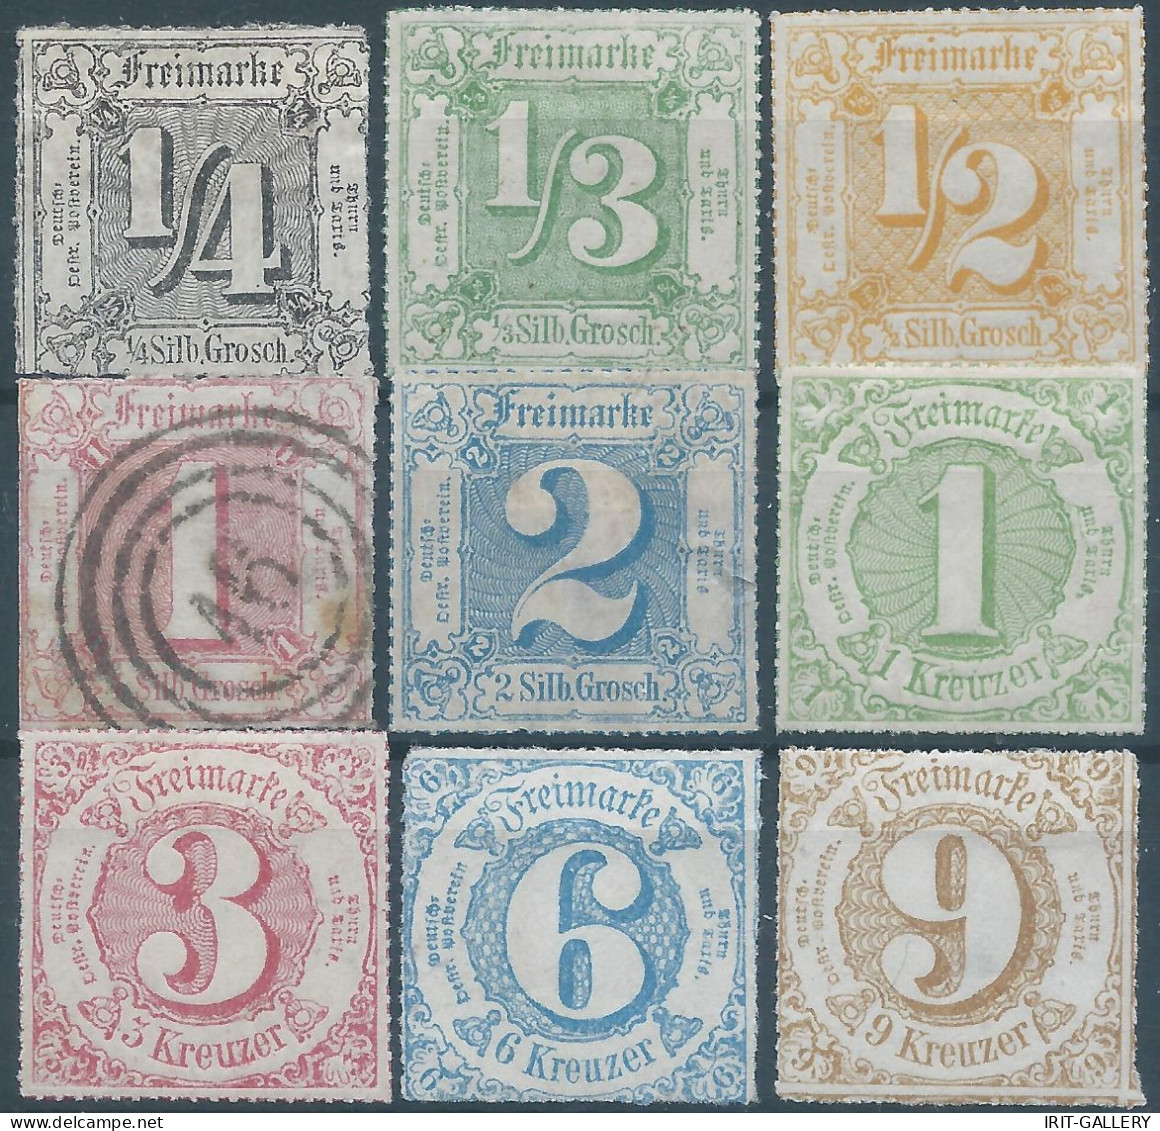 Germany-Deutschland,Thurn Und Taxis1865 Colored Print On White Paper-¼--½-1-2gr+1-3-6-9kr,Mint &1gr Used,Value:€130,00 - Neufs